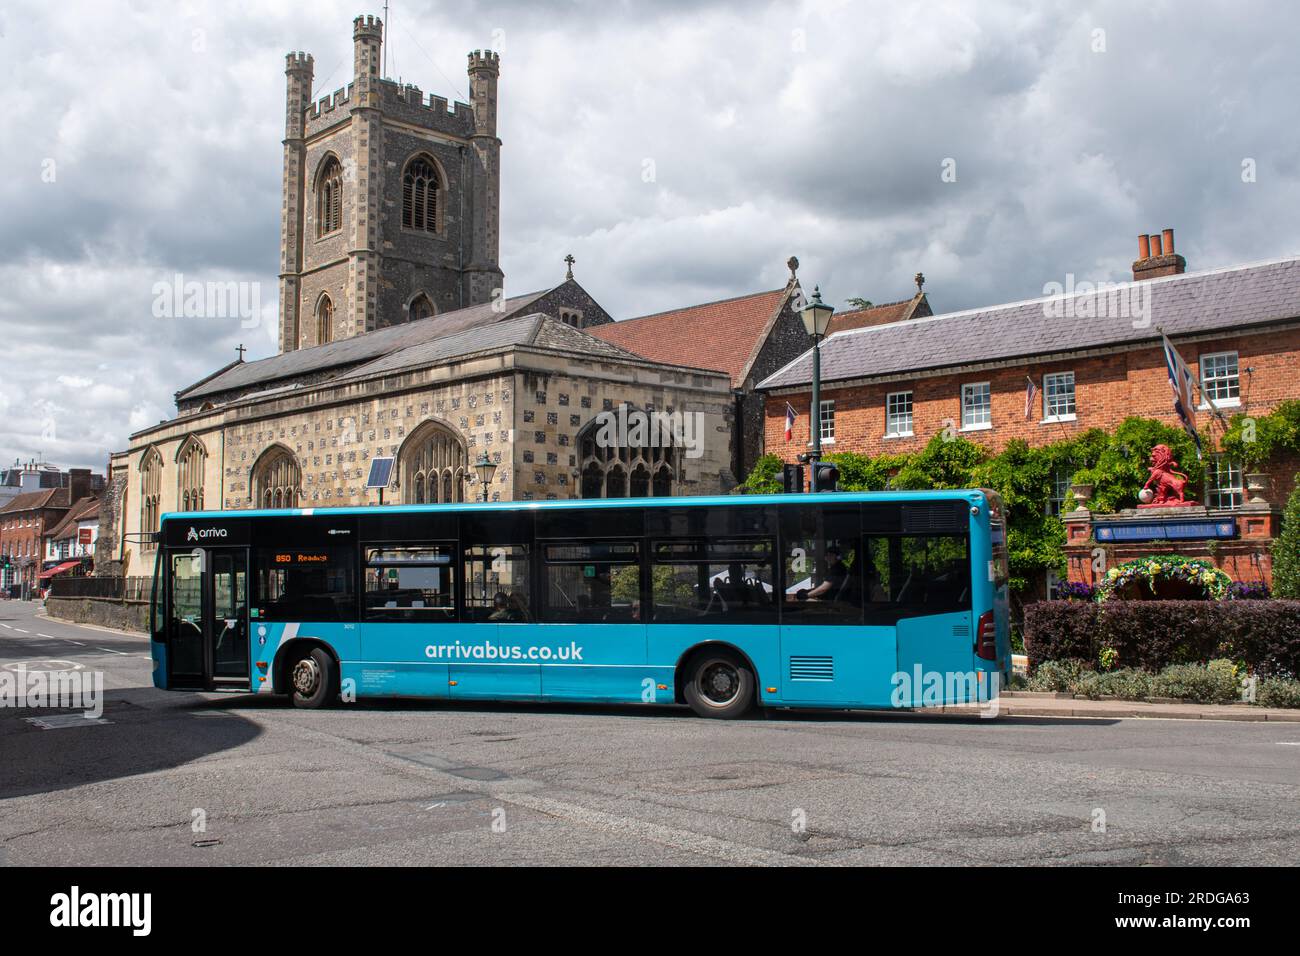 An Arriva bus, public transport, in Henley-on-Thames town centre, Oxfordshire, England, UK, passing St. Mary's Church Stock Photo